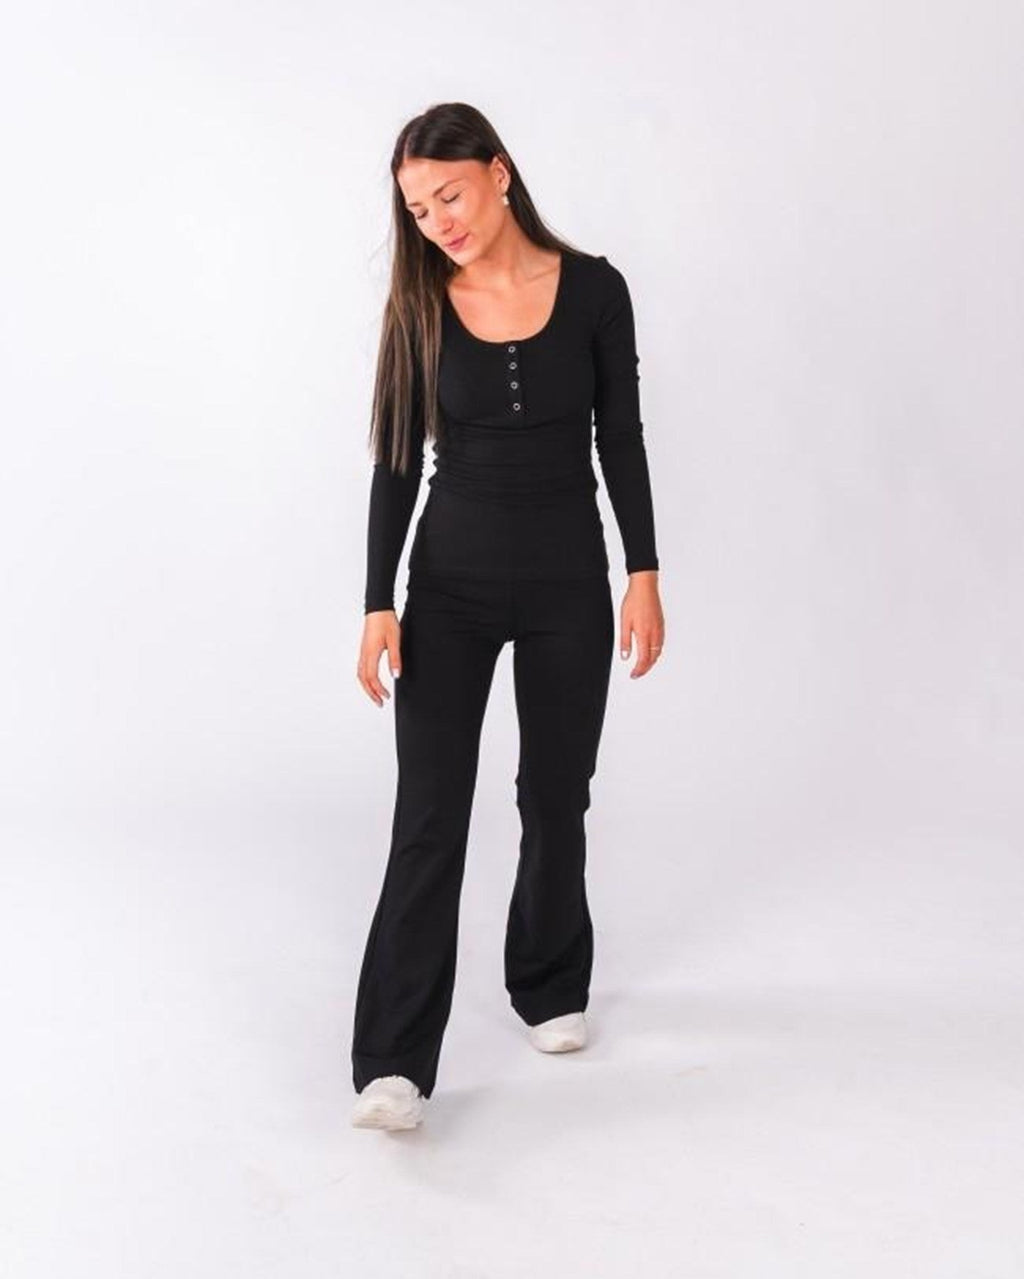 Fever Flared Pants - Black (with width)